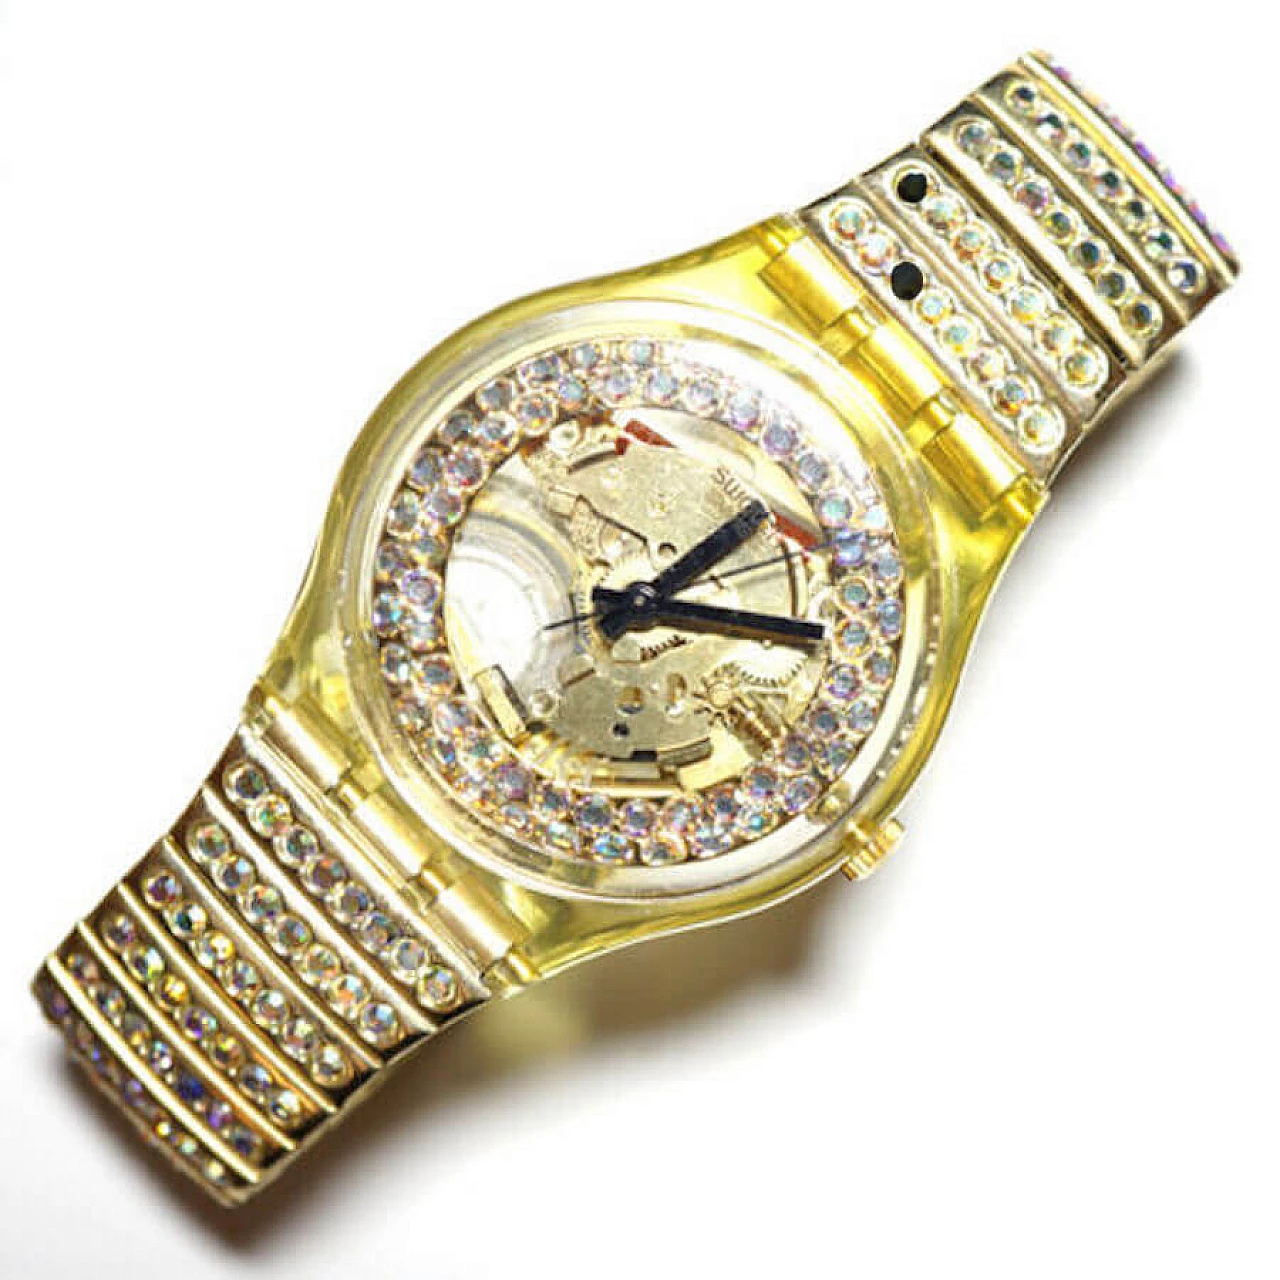 Hollywood Dream watch by Swatch, 1990s 2